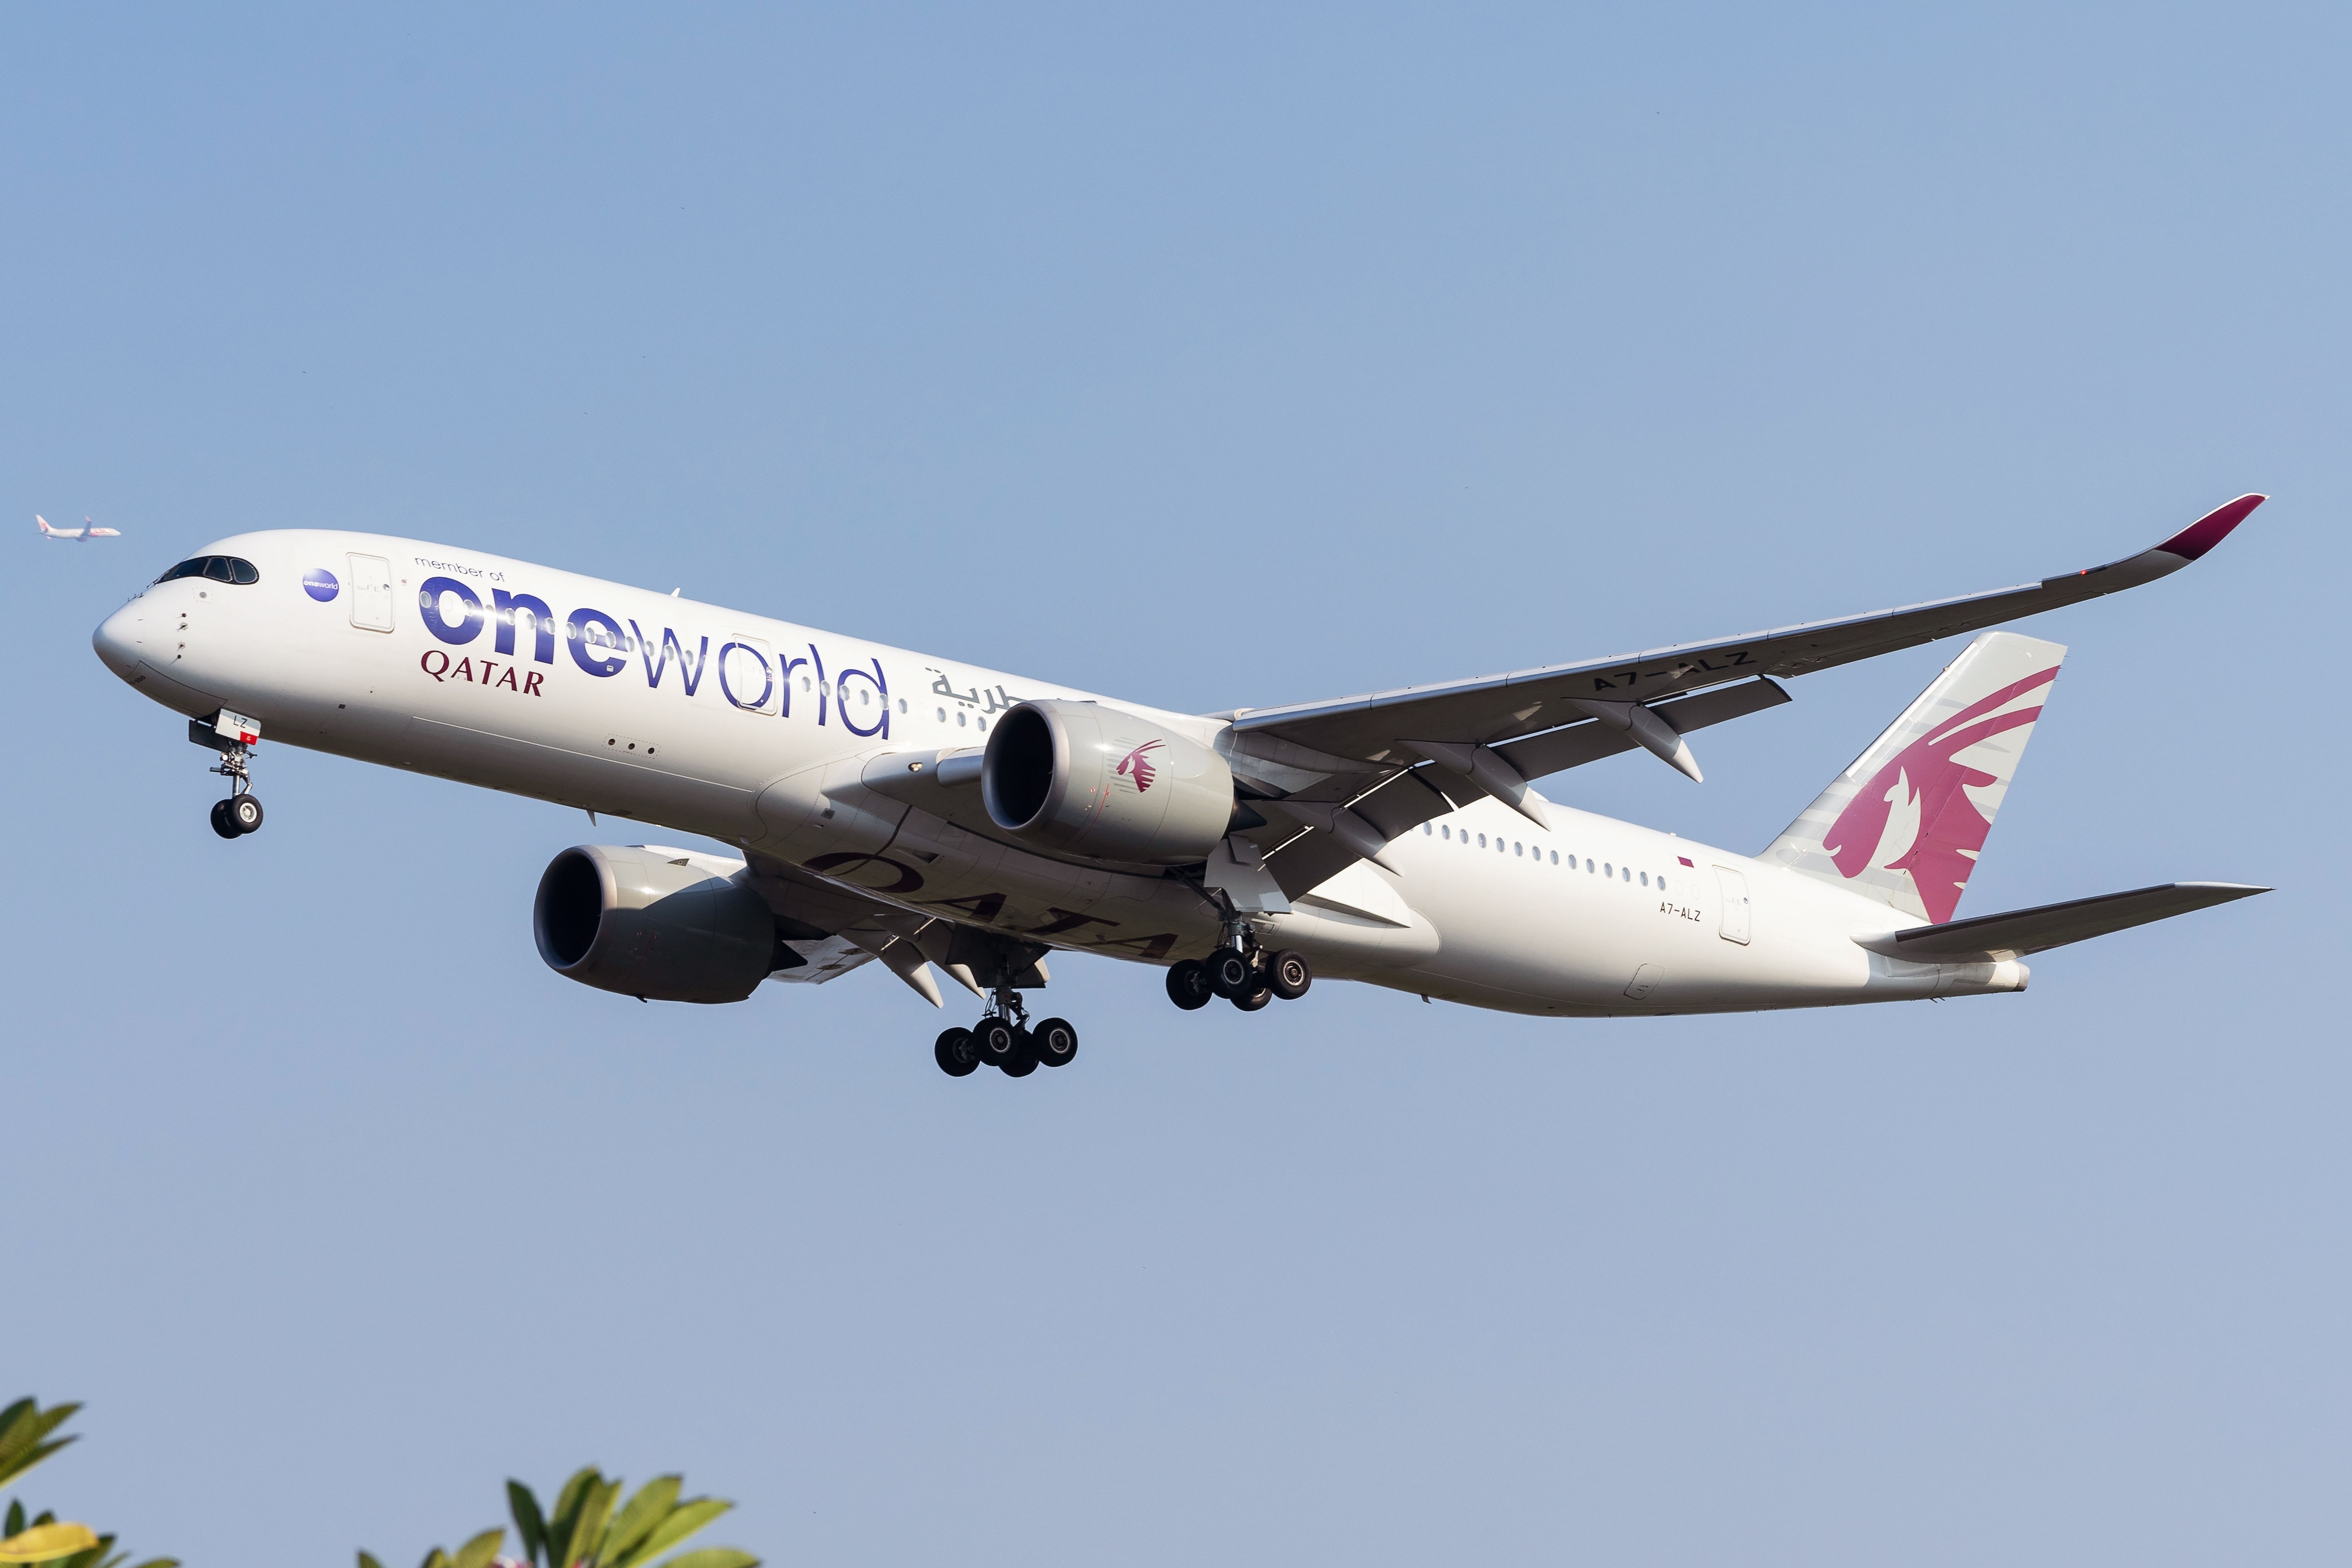 A Qatar Airways Airbus A350 in oneworld livery flying in the sky.